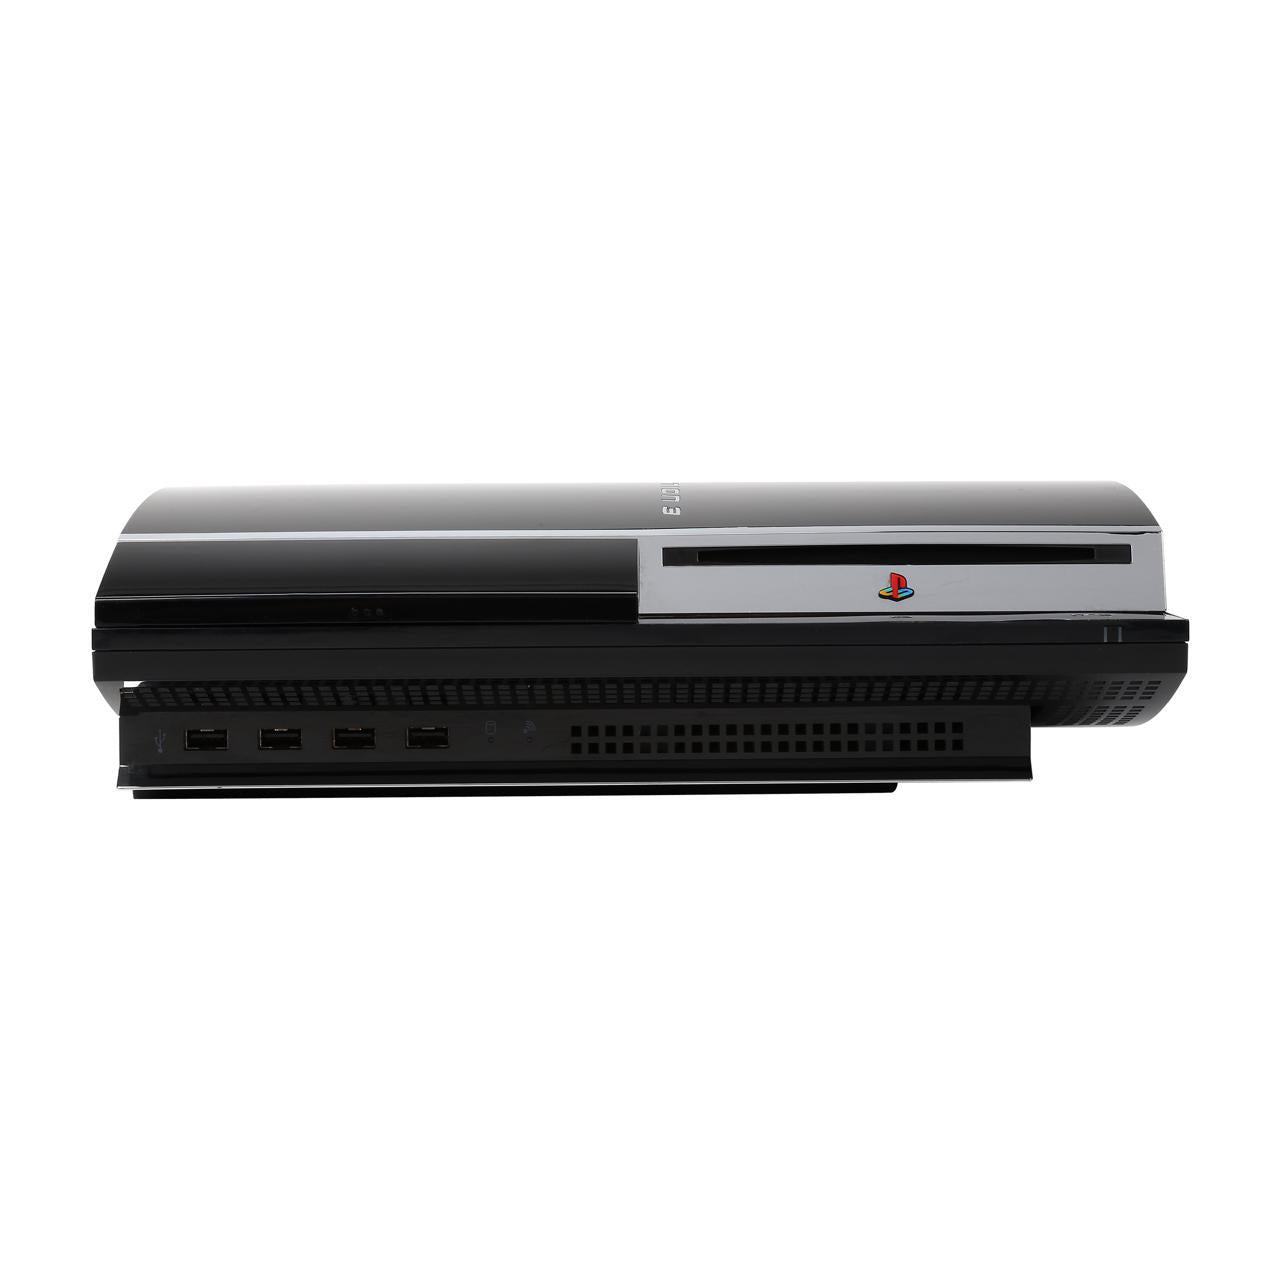 Sony Playstation 3 PS3 Console Black - 60GB - CECHA01 Backwards Compatible from 2P Gaming